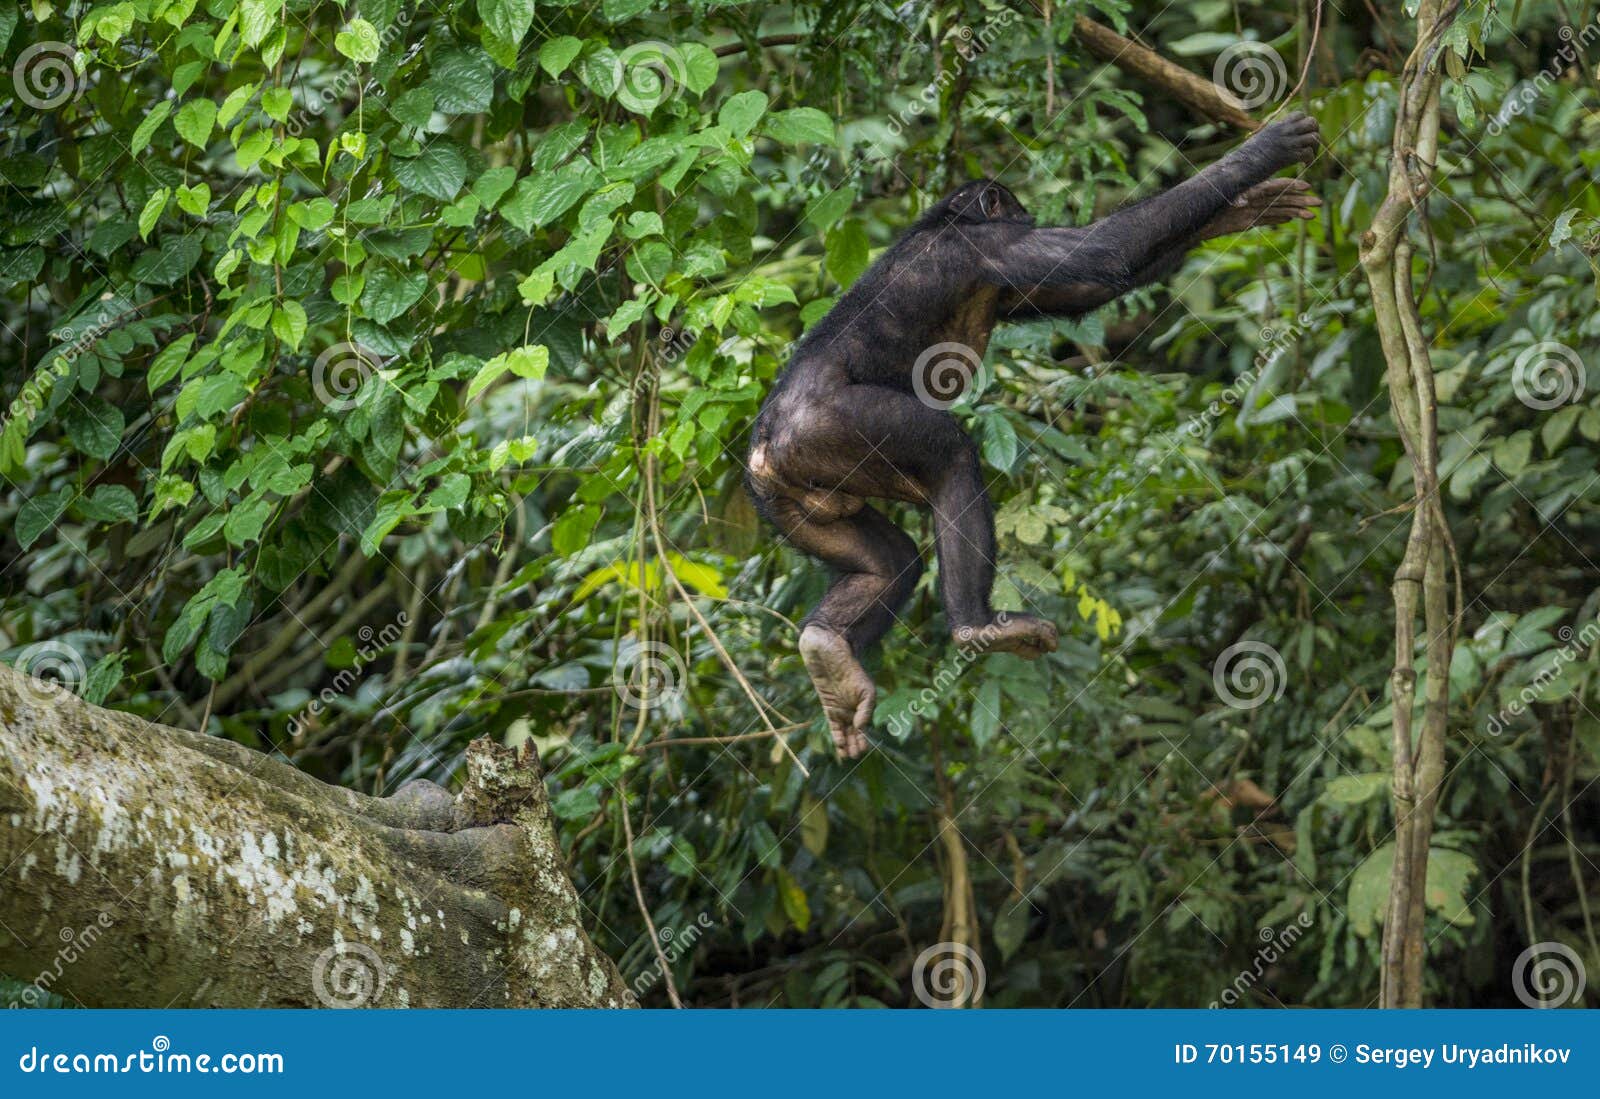 jumping bonobos (pan paniscus) on a tree branch. green natural jungle background.